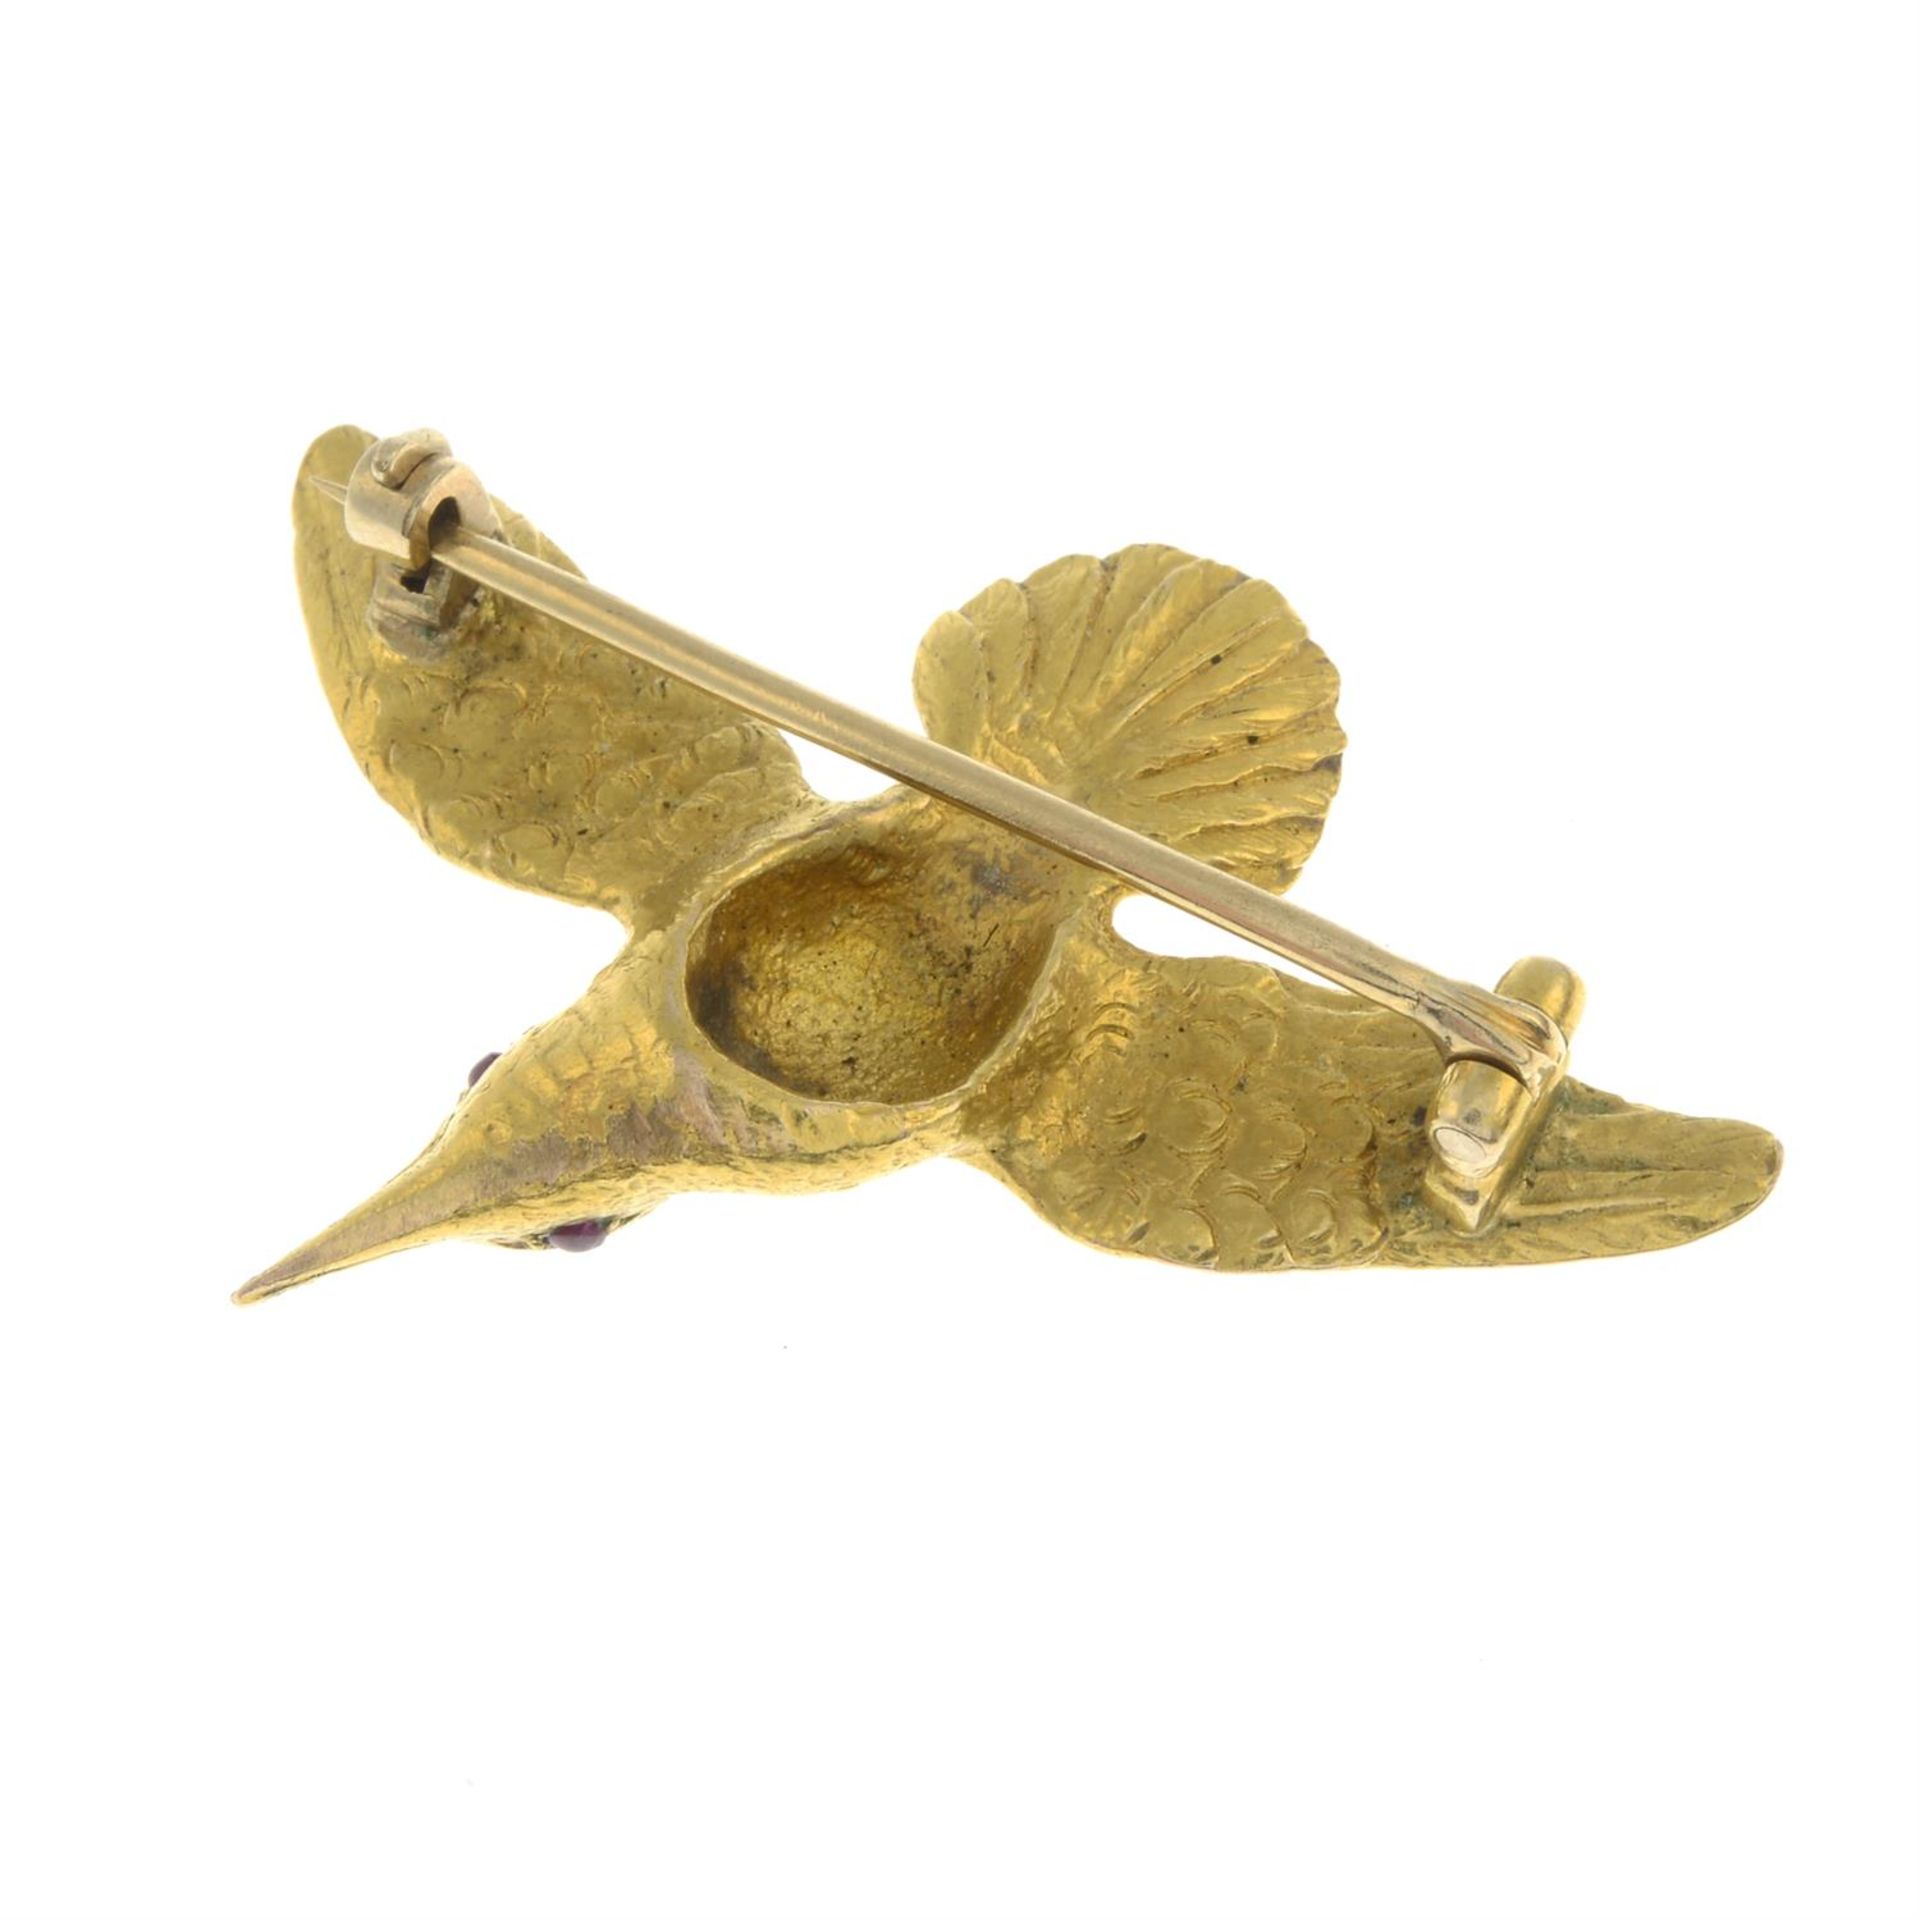 An early 20th century gold bird brooch, possibly a hummingbird, with ruby eyes. - Image 3 of 4